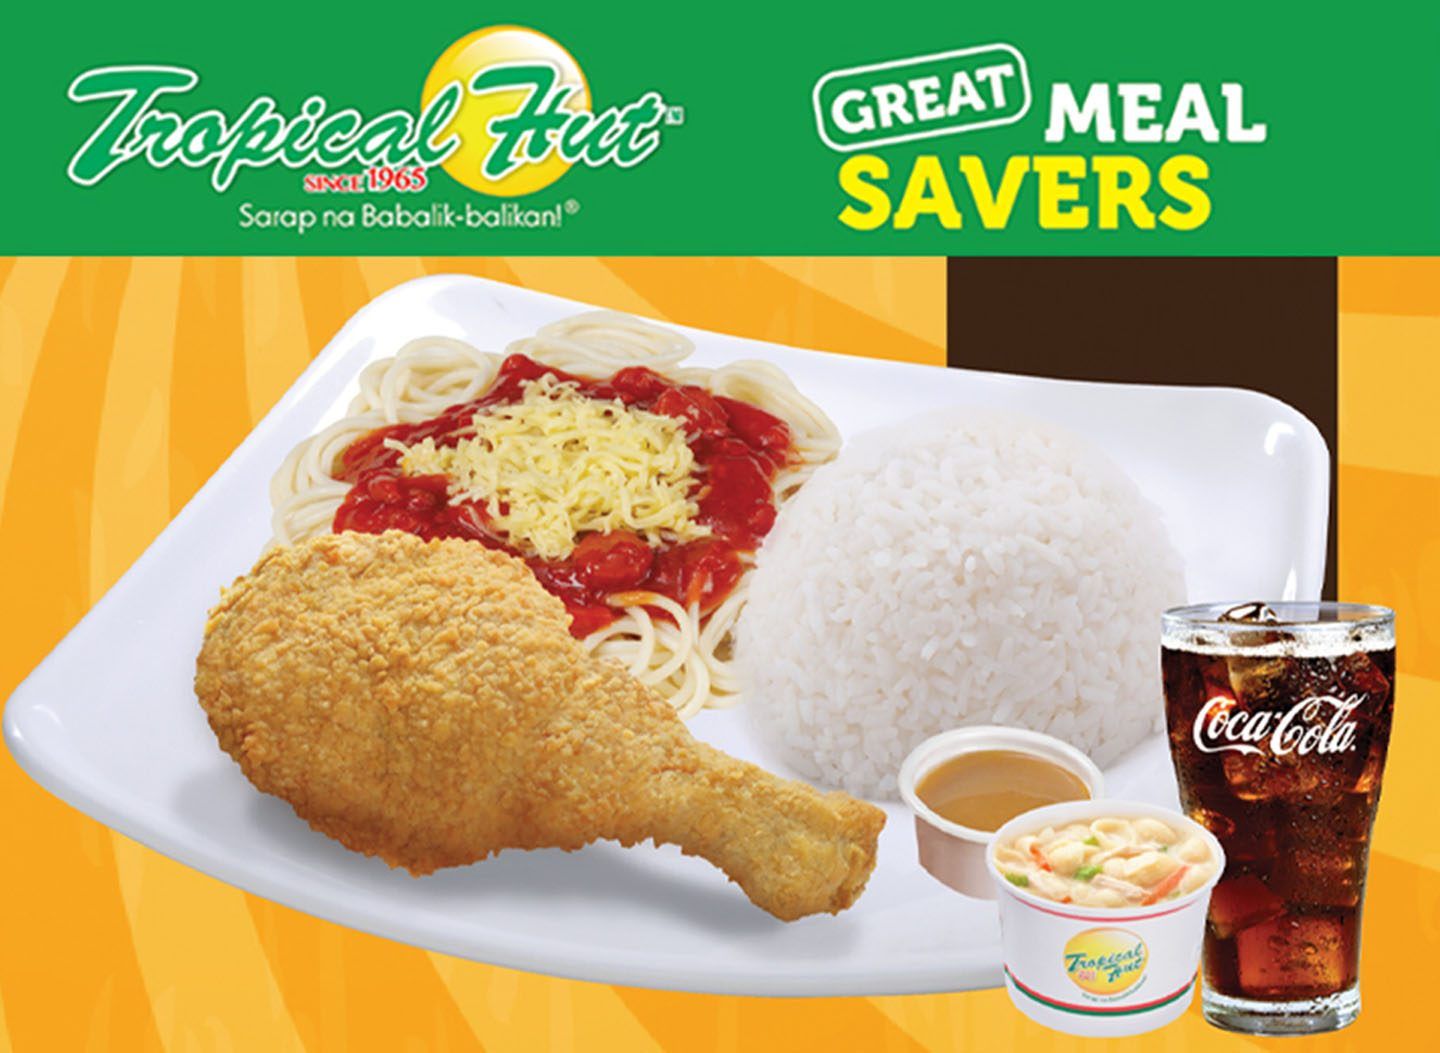 Great Meal Savers 2